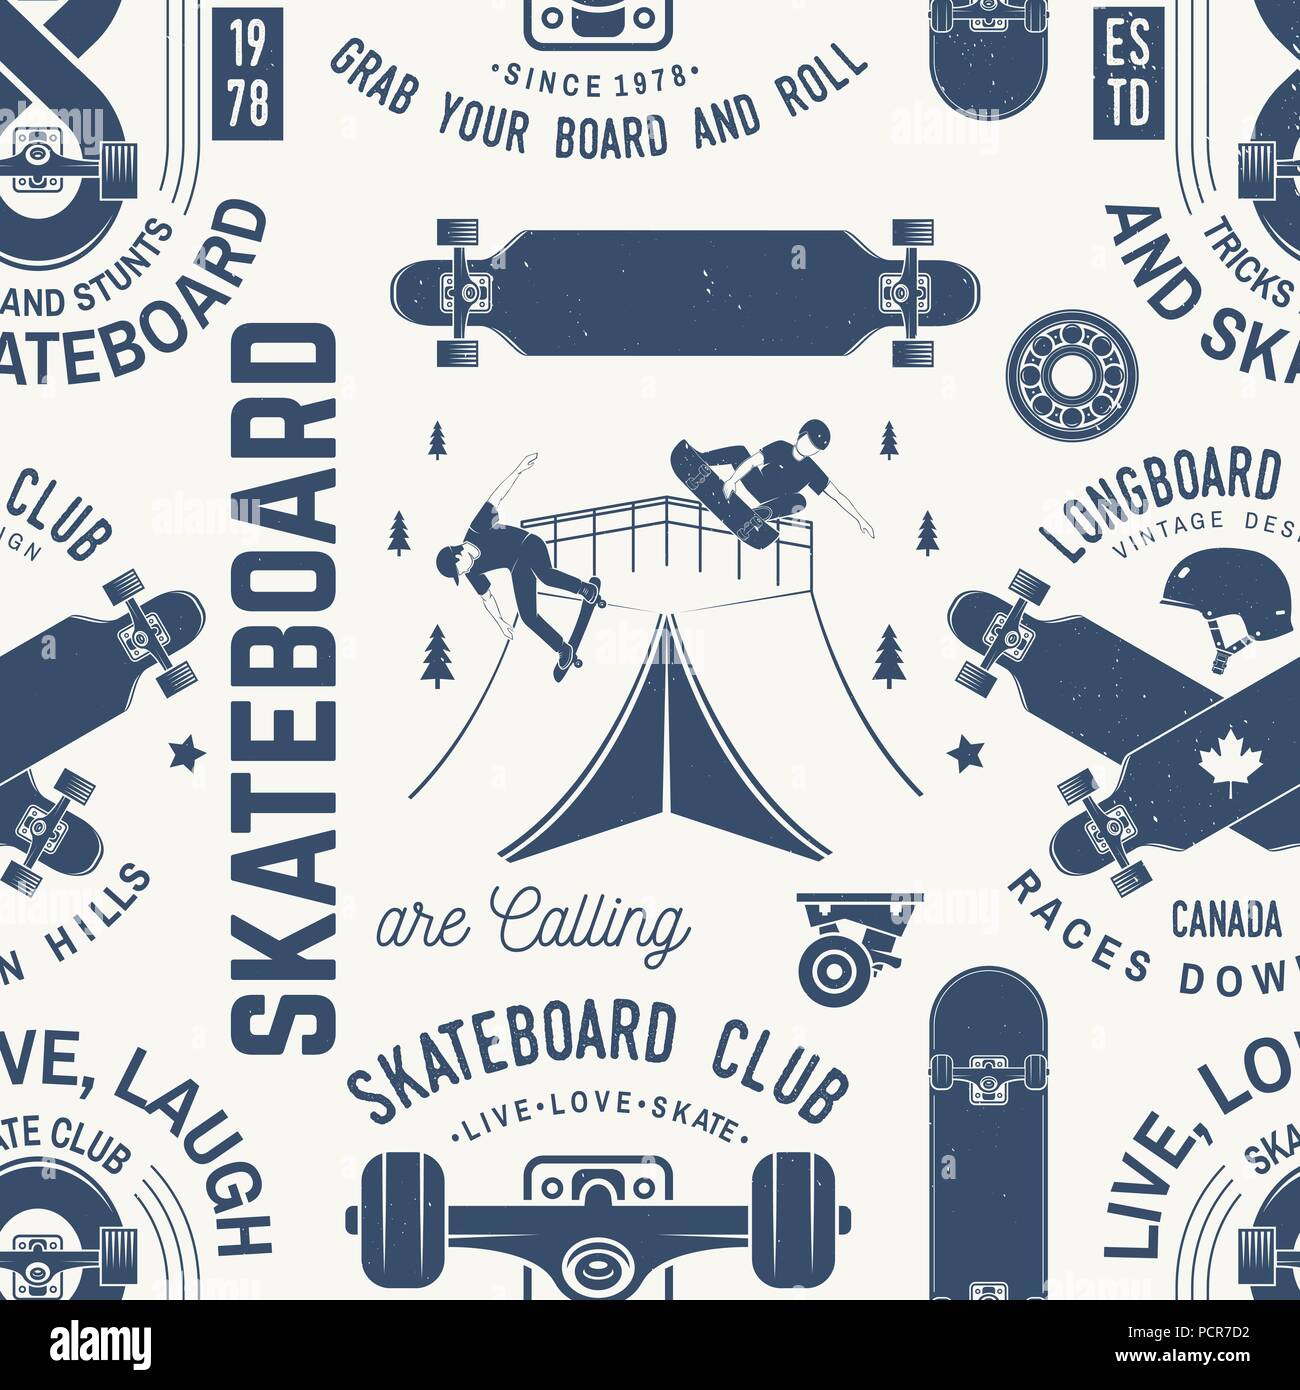 Skateboard and longboard club seamless pattern or background. Vector illustration. Retro typography design with skateboarder, helmet, skateboard silhouette. Extreme sport. Stock Vector